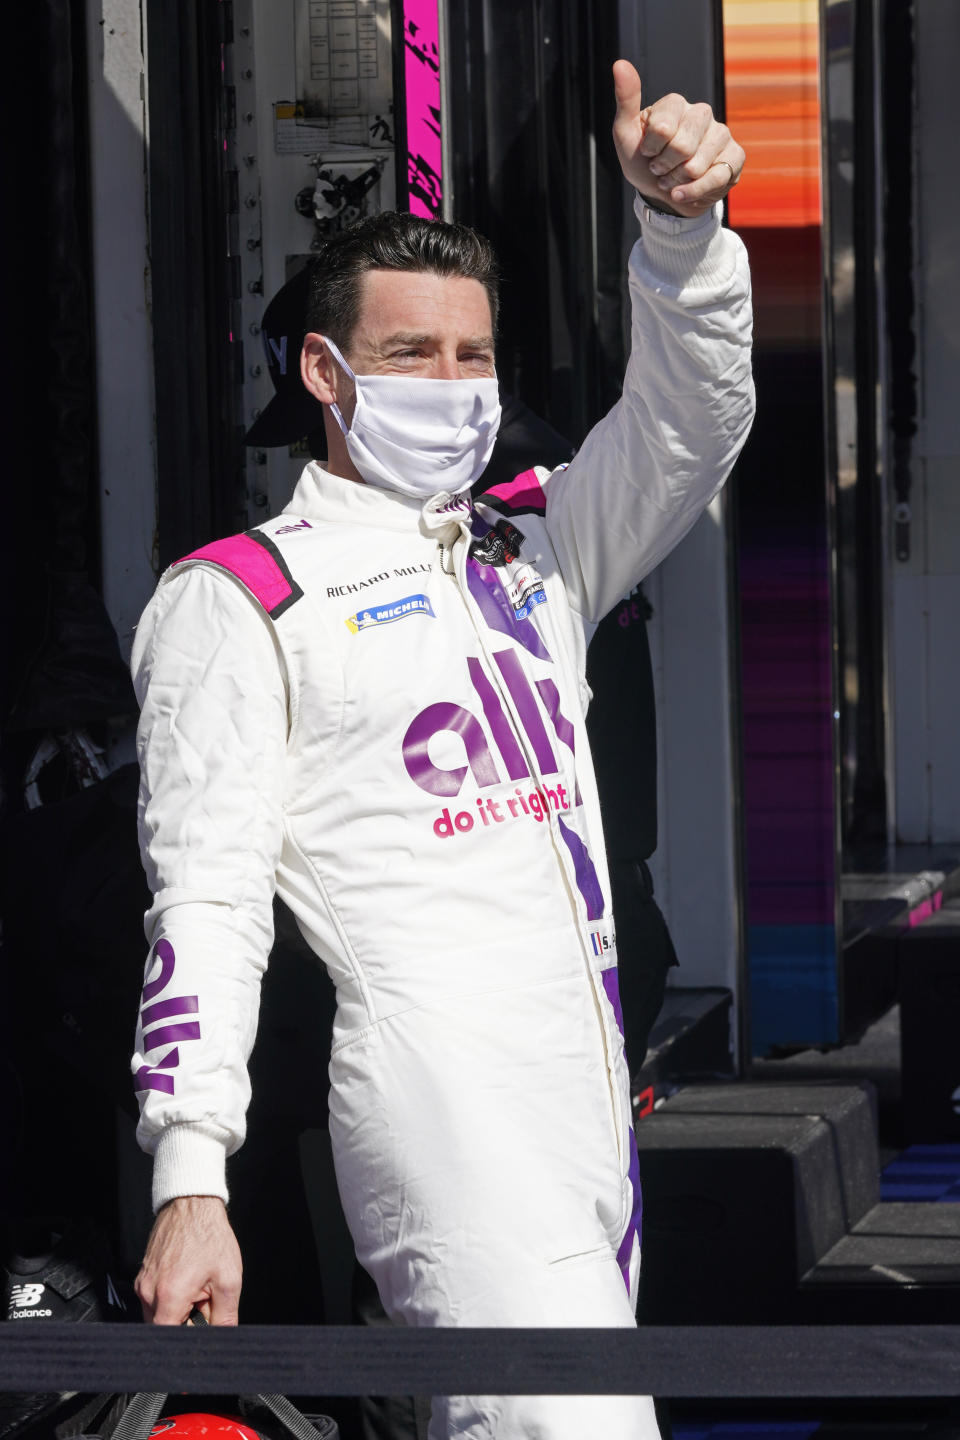 Simon Pagenaud, of France, gives the thumbs up to fans cheering him from the Fan Zone after a practice session for the Rolex 24 hour race at Daytona International Speedway, Friday, Jan. 29, 2021, in Daytona Beach, Fla. (AP Photo/John Raoux)